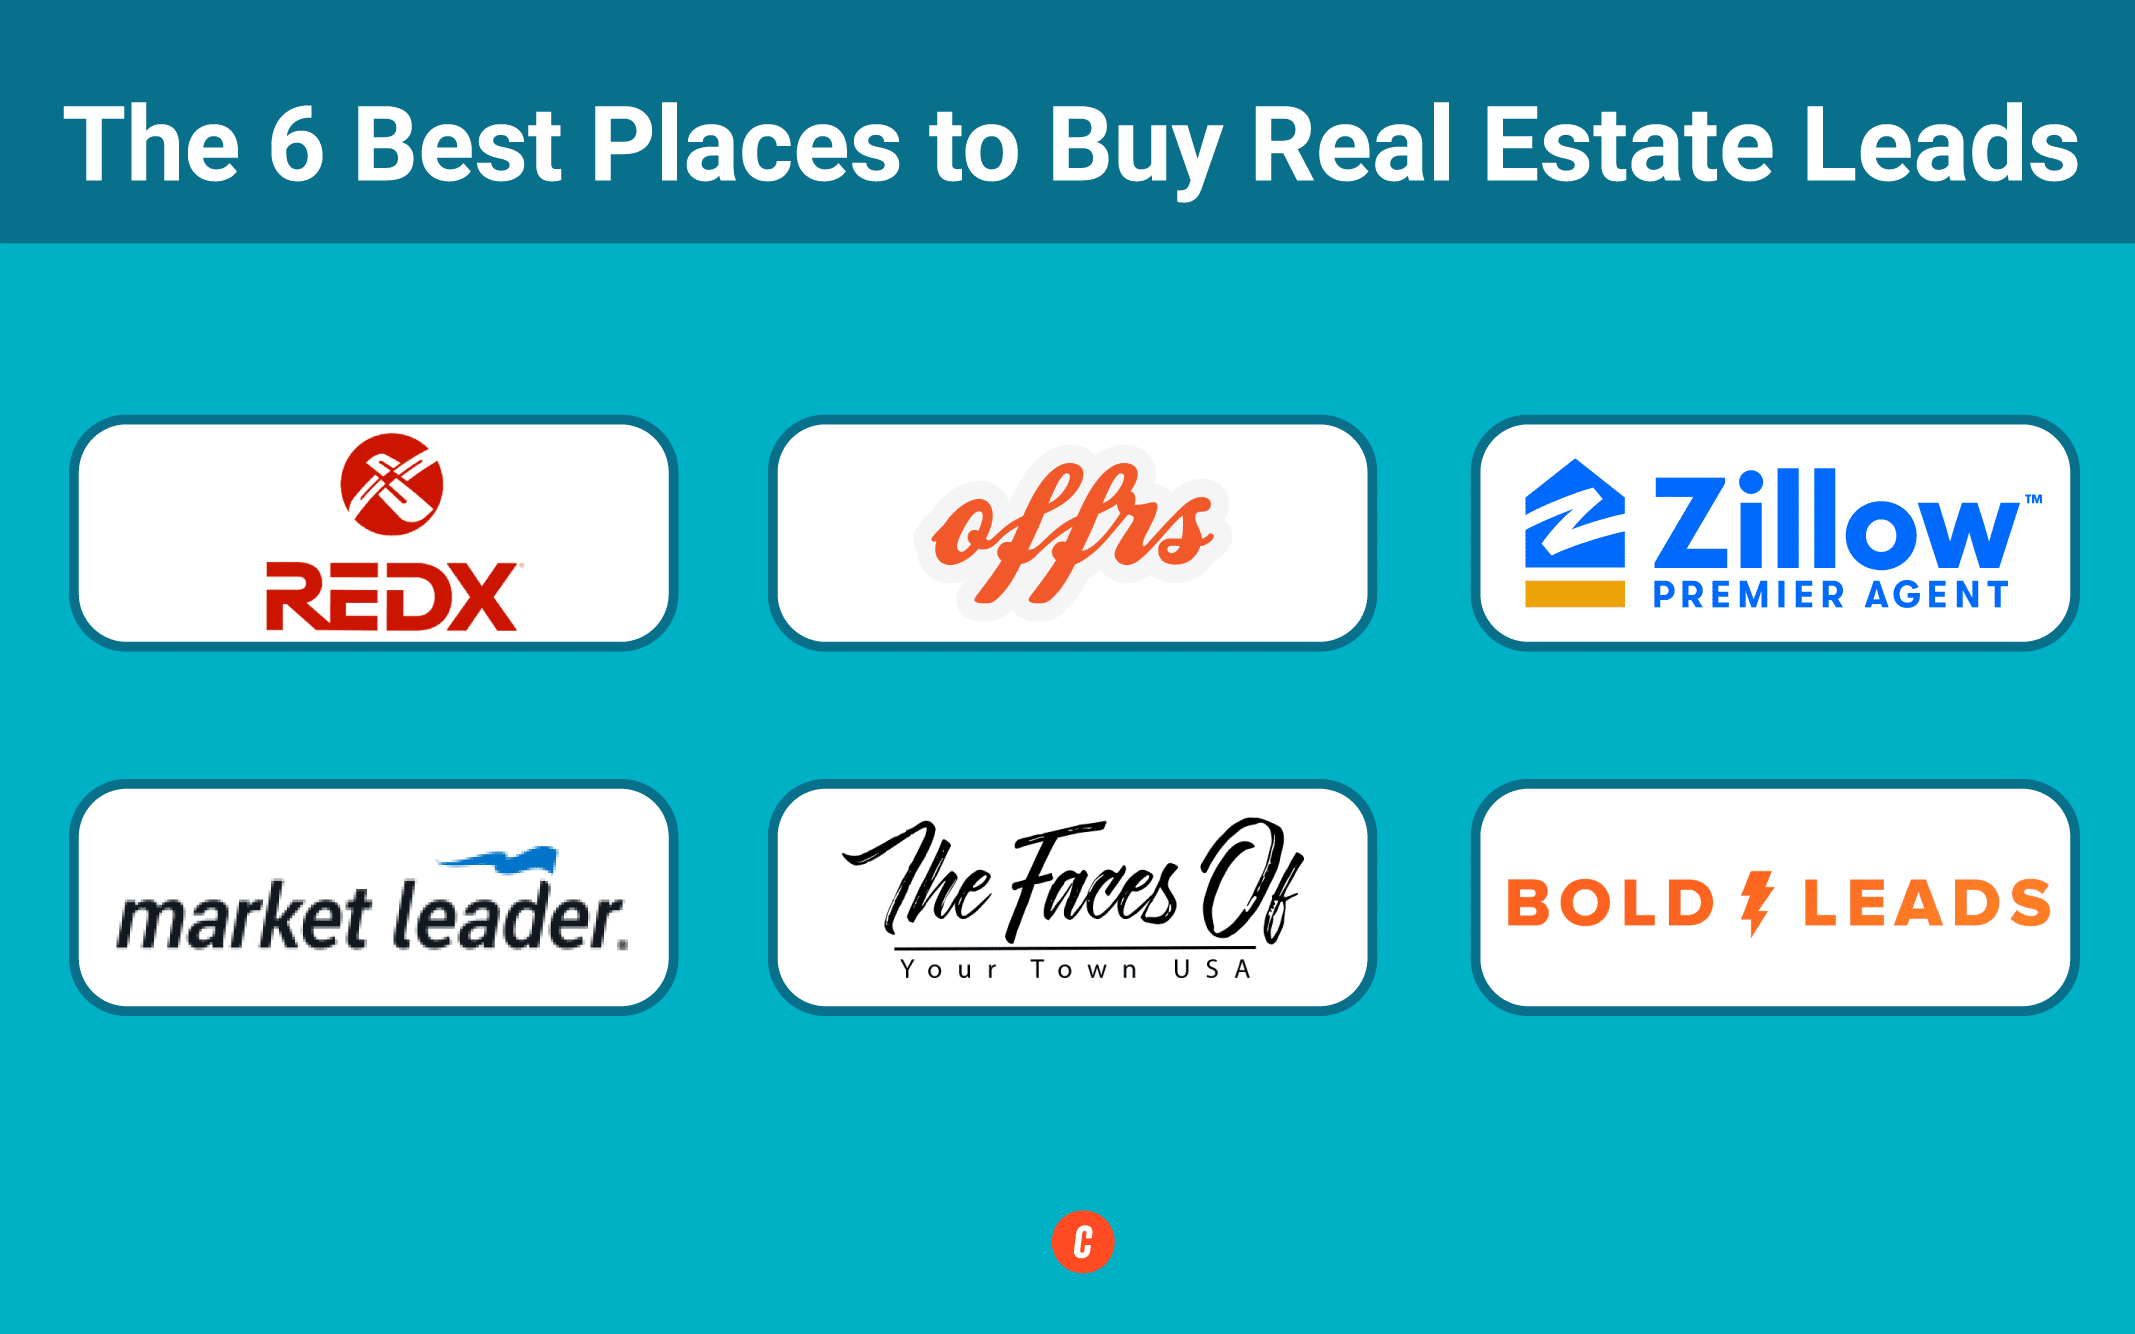 The 6 Best Places to Buy Real Estate Leads